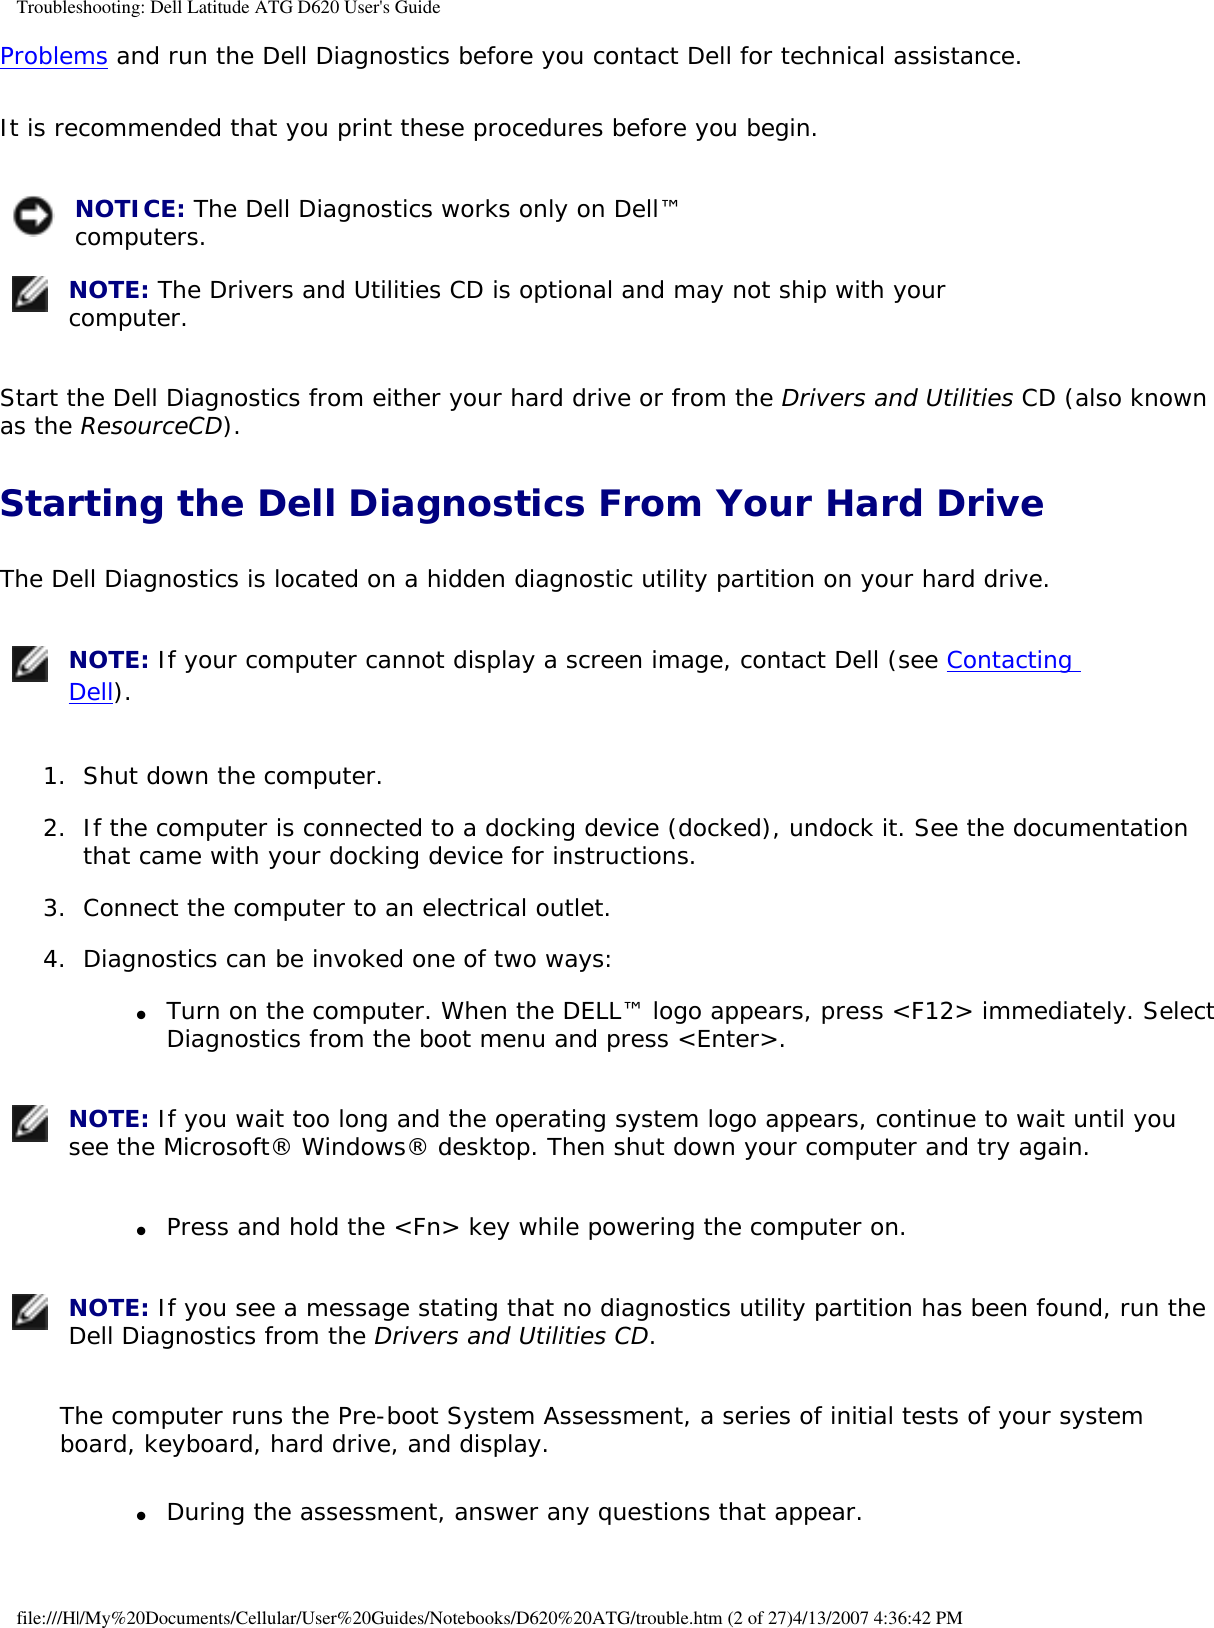 Troubleshooting: Dell Latitude ATG D620 User&apos;s GuideProblems and run the Dell Diagnostics before you contact Dell for technical assistance.It is recommended that you print these procedures before you begin. NOTICE: The Dell Diagnostics works only on Dell™ computers.  NOTE: The Drivers and Utilities CD is optional and may not ship with your computer. Start the Dell Diagnostics from either your hard drive or from the Drivers and Utilities CD (also known as the ResourceCD).Starting the Dell Diagnostics From Your Hard DriveThe Dell Diagnostics is located on a hidden diagnostic utility partition on your hard drive. NOTE: If your computer cannot display a screen image, contact Dell (see Contacting Dell). 1.  Shut down the computer.   2.  If the computer is connected to a docking device (docked), undock it. See the documentation that came with your docking device for instructions.   3.  Connect the computer to an electrical outlet.   4.  Diagnostics can be invoked one of two ways:   ●     Turn on the computer. When the DELL™ logo appears, press &lt;F12&gt; immediately. Select Diagnostics from the boot menu and press &lt;Enter&gt;.   NOTE: If you wait too long and the operating system logo appears, continue to wait until you see the Microsoft® Windows® desktop. Then shut down your computer and try again.●     Press and hold the &lt;Fn&gt; key while powering the computer on.   NOTE: If you see a message stating that no diagnostics utility partition has been found, run the Dell Diagnostics from the Drivers and Utilities CD.The computer runs the Pre-boot System Assessment, a series of initial tests of your system board, keyboard, hard drive, and display.●     During the assessment, answer any questions that appear.  file:///H|/My%20Documents/Cellular/User%20Guides/Notebooks/D620%20ATG/trouble.htm (2 of 27)4/13/2007 4:36:42 PM